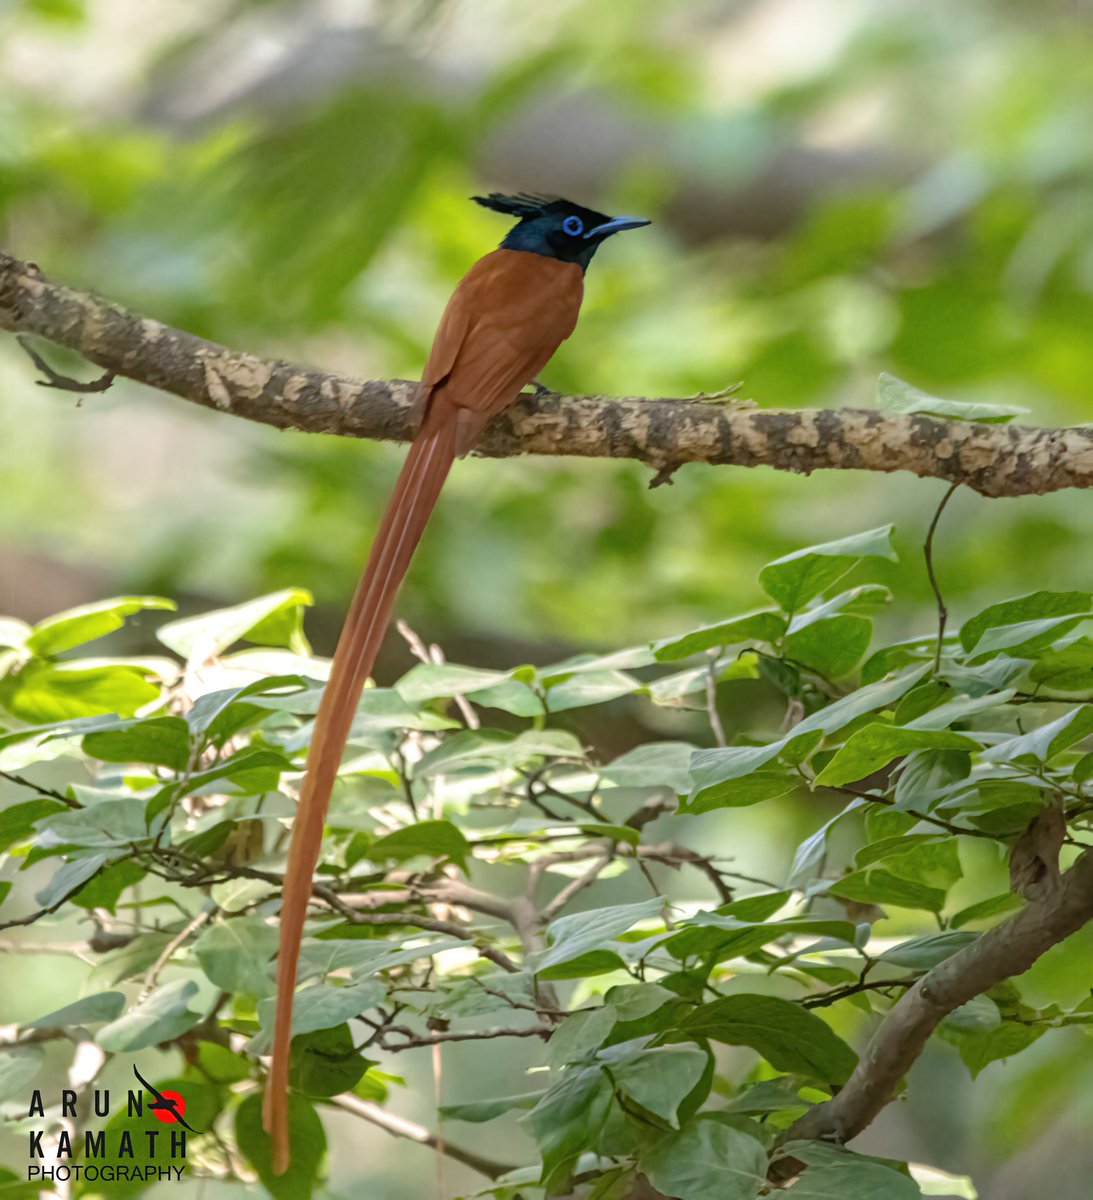 Start of the week with this handsome Indian Paradise Flycatcher. They visit the north India for breeding in summer. #IndiAves #TwitterNatureCommunity #thephotohour #birdwatching #birds